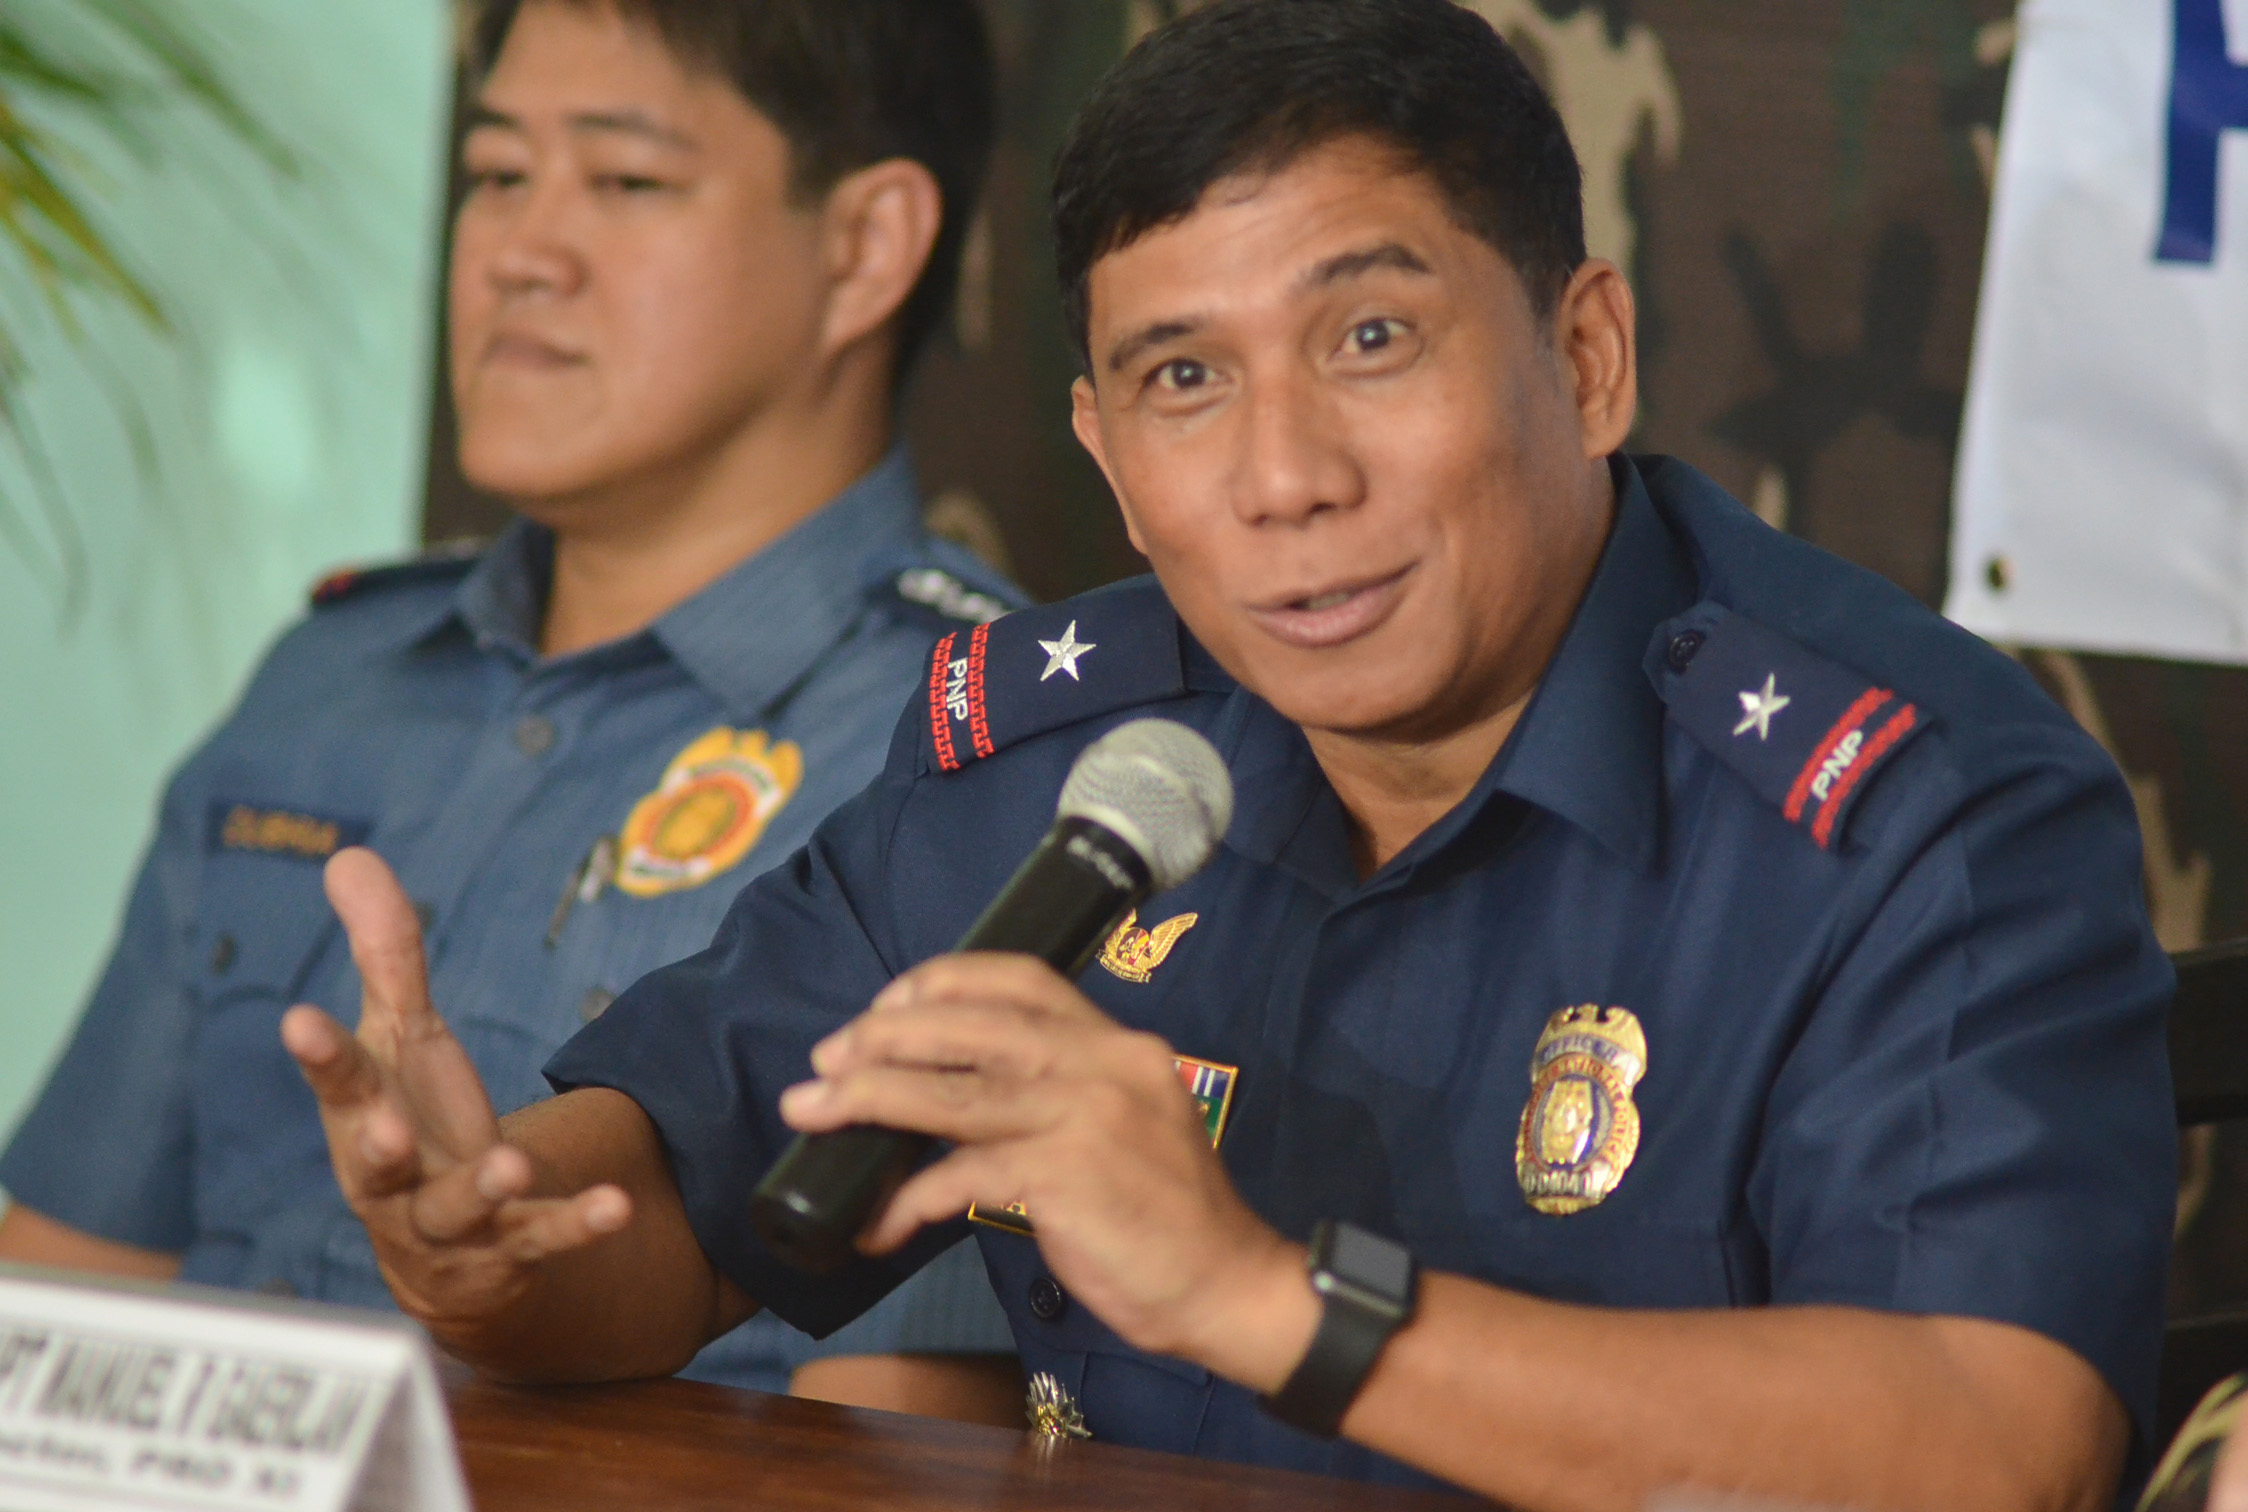 RISING NUMBER. Chief Superintendent Manuel Gaerlan of the Police Regional Office 11 says the number of drug users and pushers who surrendered to authorities in Davao Region is now 31,964, while 10 pushers have been killed in police operations since July 1. (Medel V. Hernani/davaotoday.com)